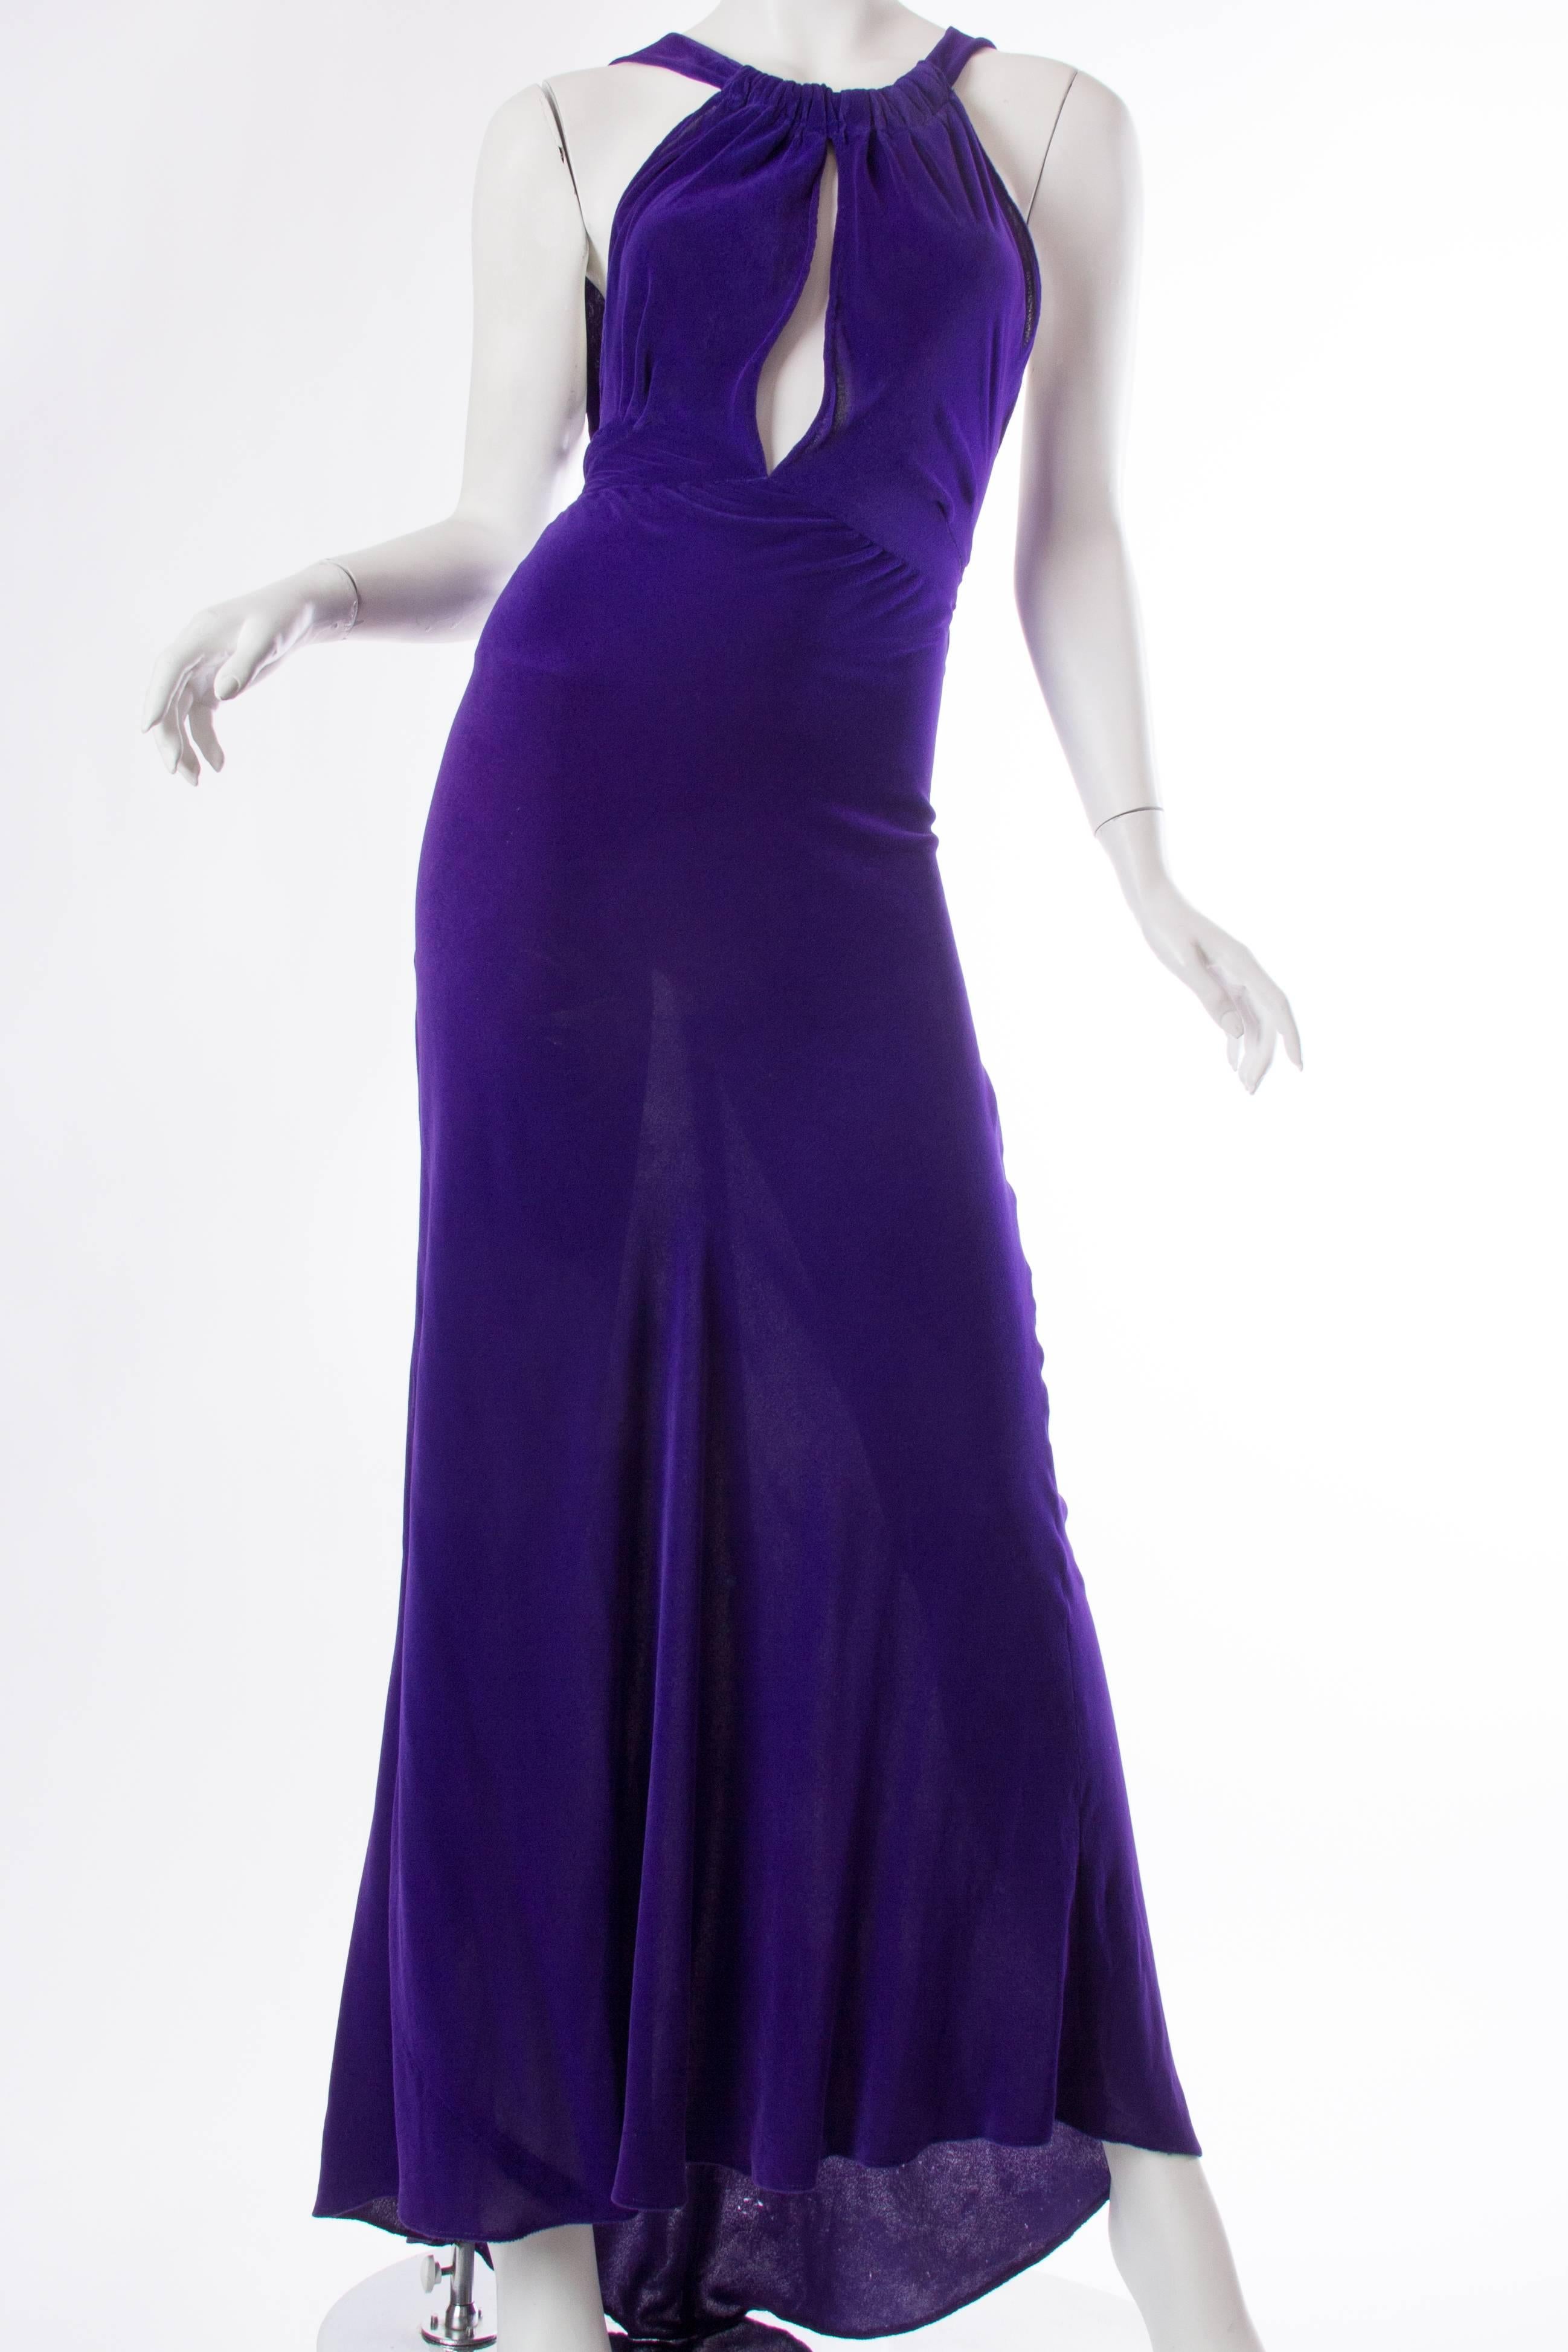 Very rare to find a gown of this era which is so revealing whilst maintaining the ageless glamour and old hollywood spirit of the 1930s. Made from luscious silk velvet it drapes and clings to every curve. 